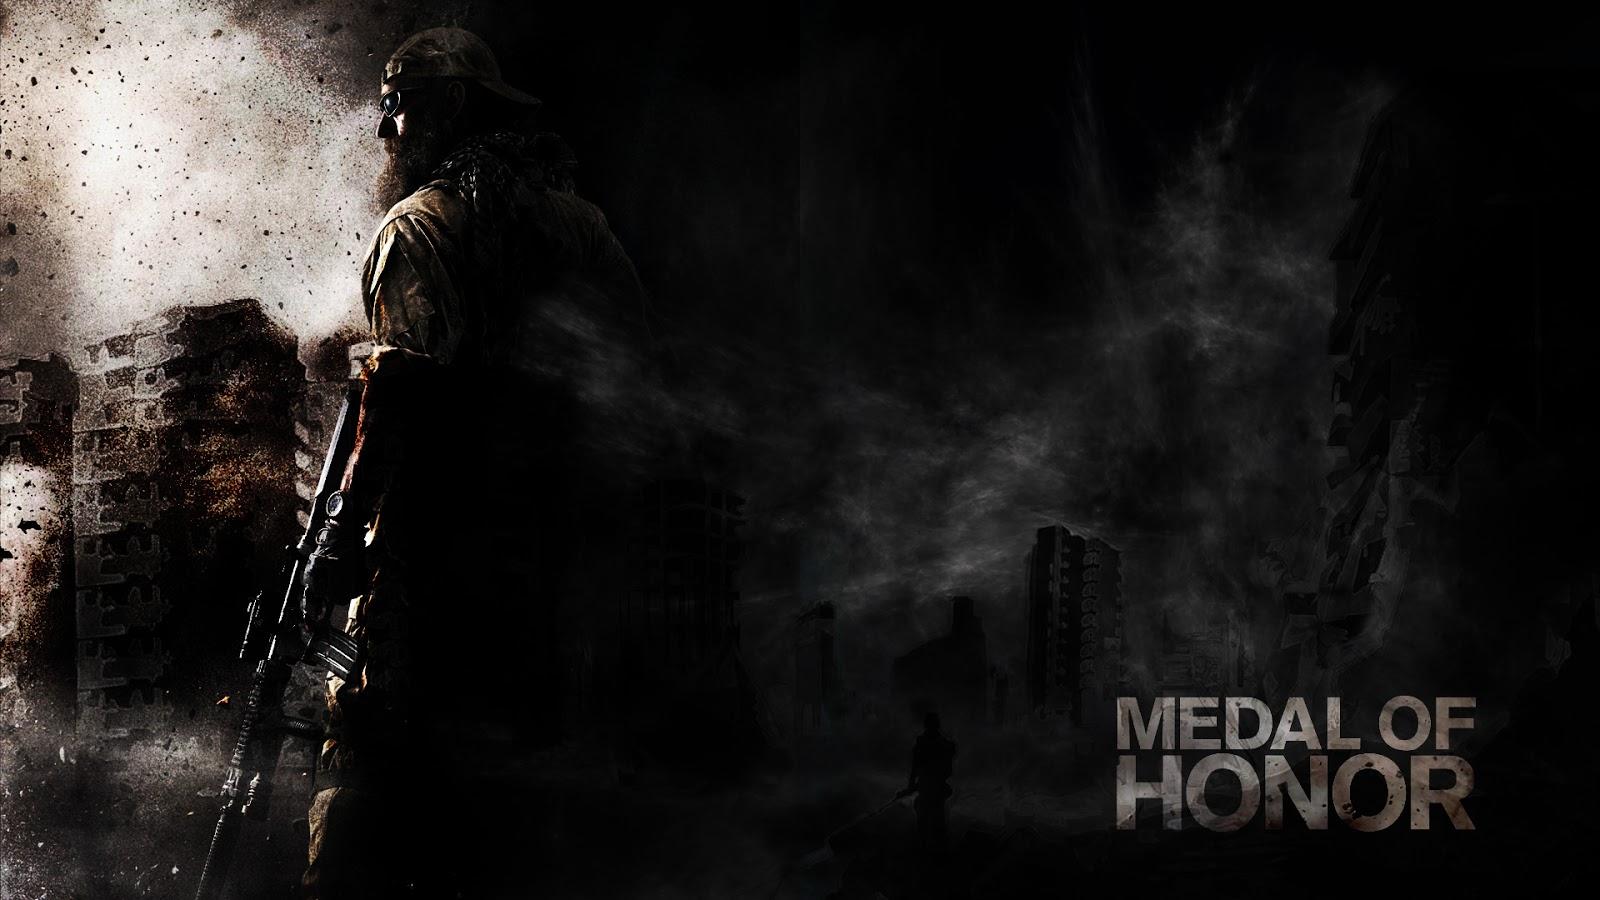 Medal of Honor Wallpaper. Death Before